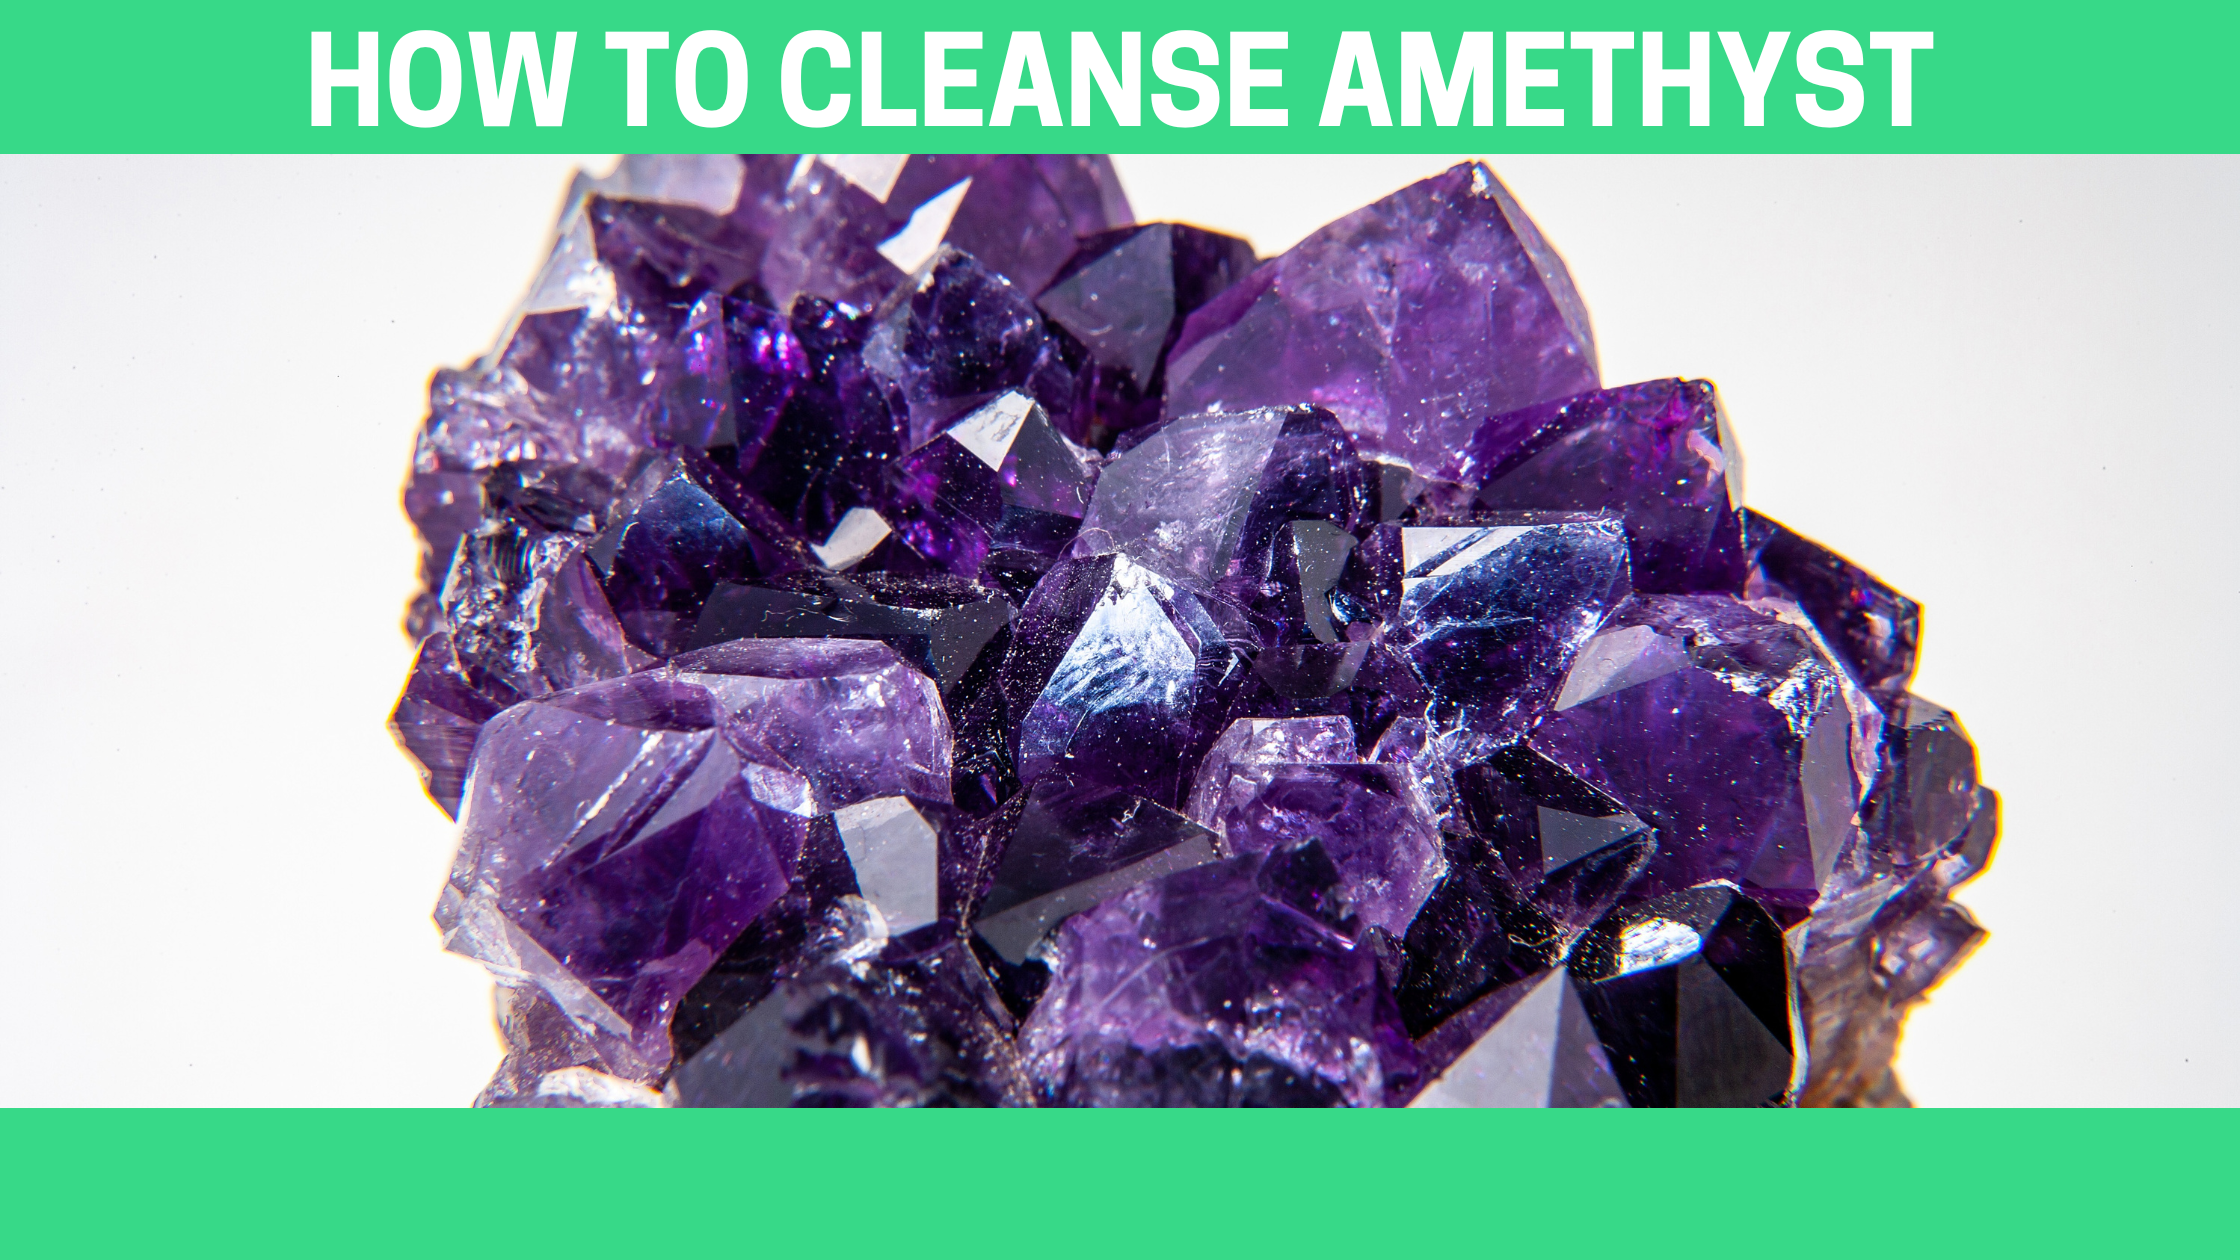 How To Cleanse Amethyst